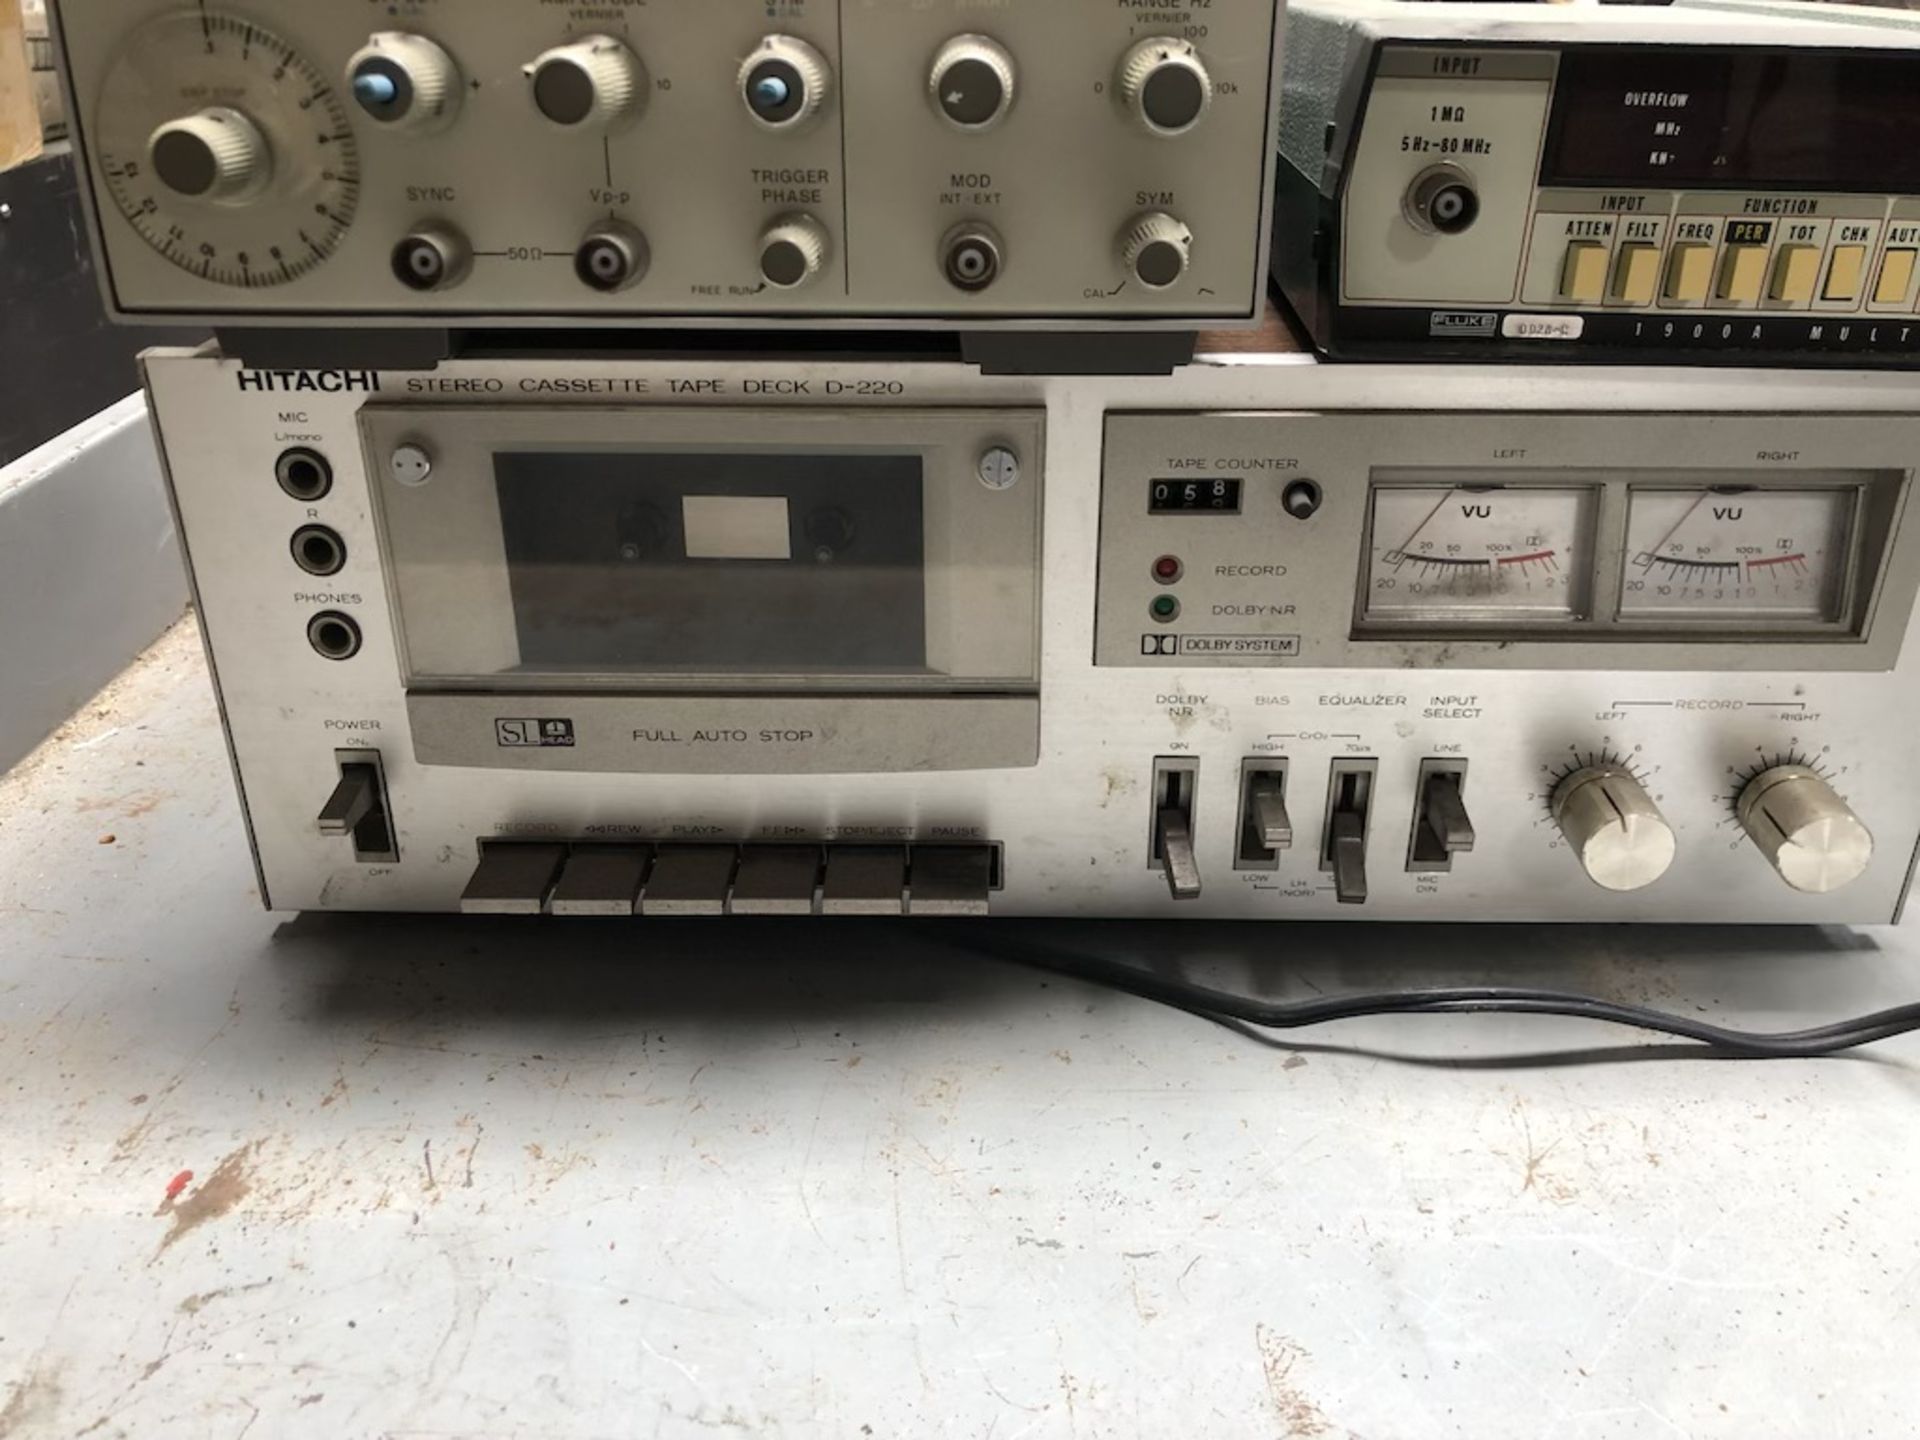 QTY OF 3 ITEMS: HITACHI STEREO CASSETTE TAPE DECK D-220; HEWLETT PACKARD 3312A FUNCTION GENERATOR - Image 2 of 16